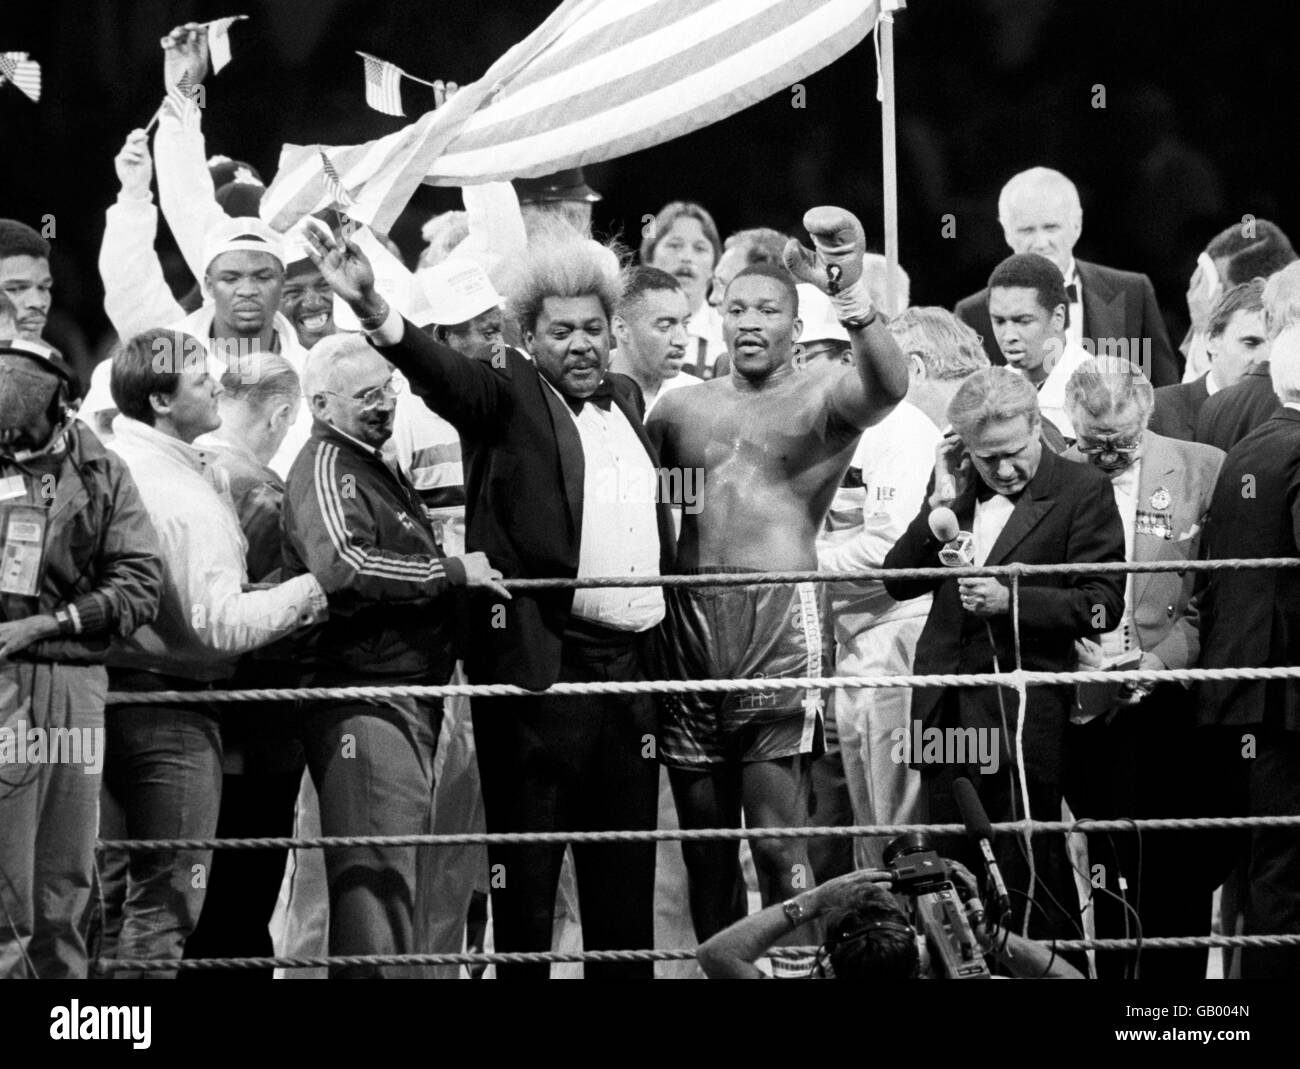 A victorious Tim Witherspoon celebrates with his promotor Don King after flooring Frank Bruno in the 11th round to retain his WBA title belt at Wembley Stadium Stock Photo